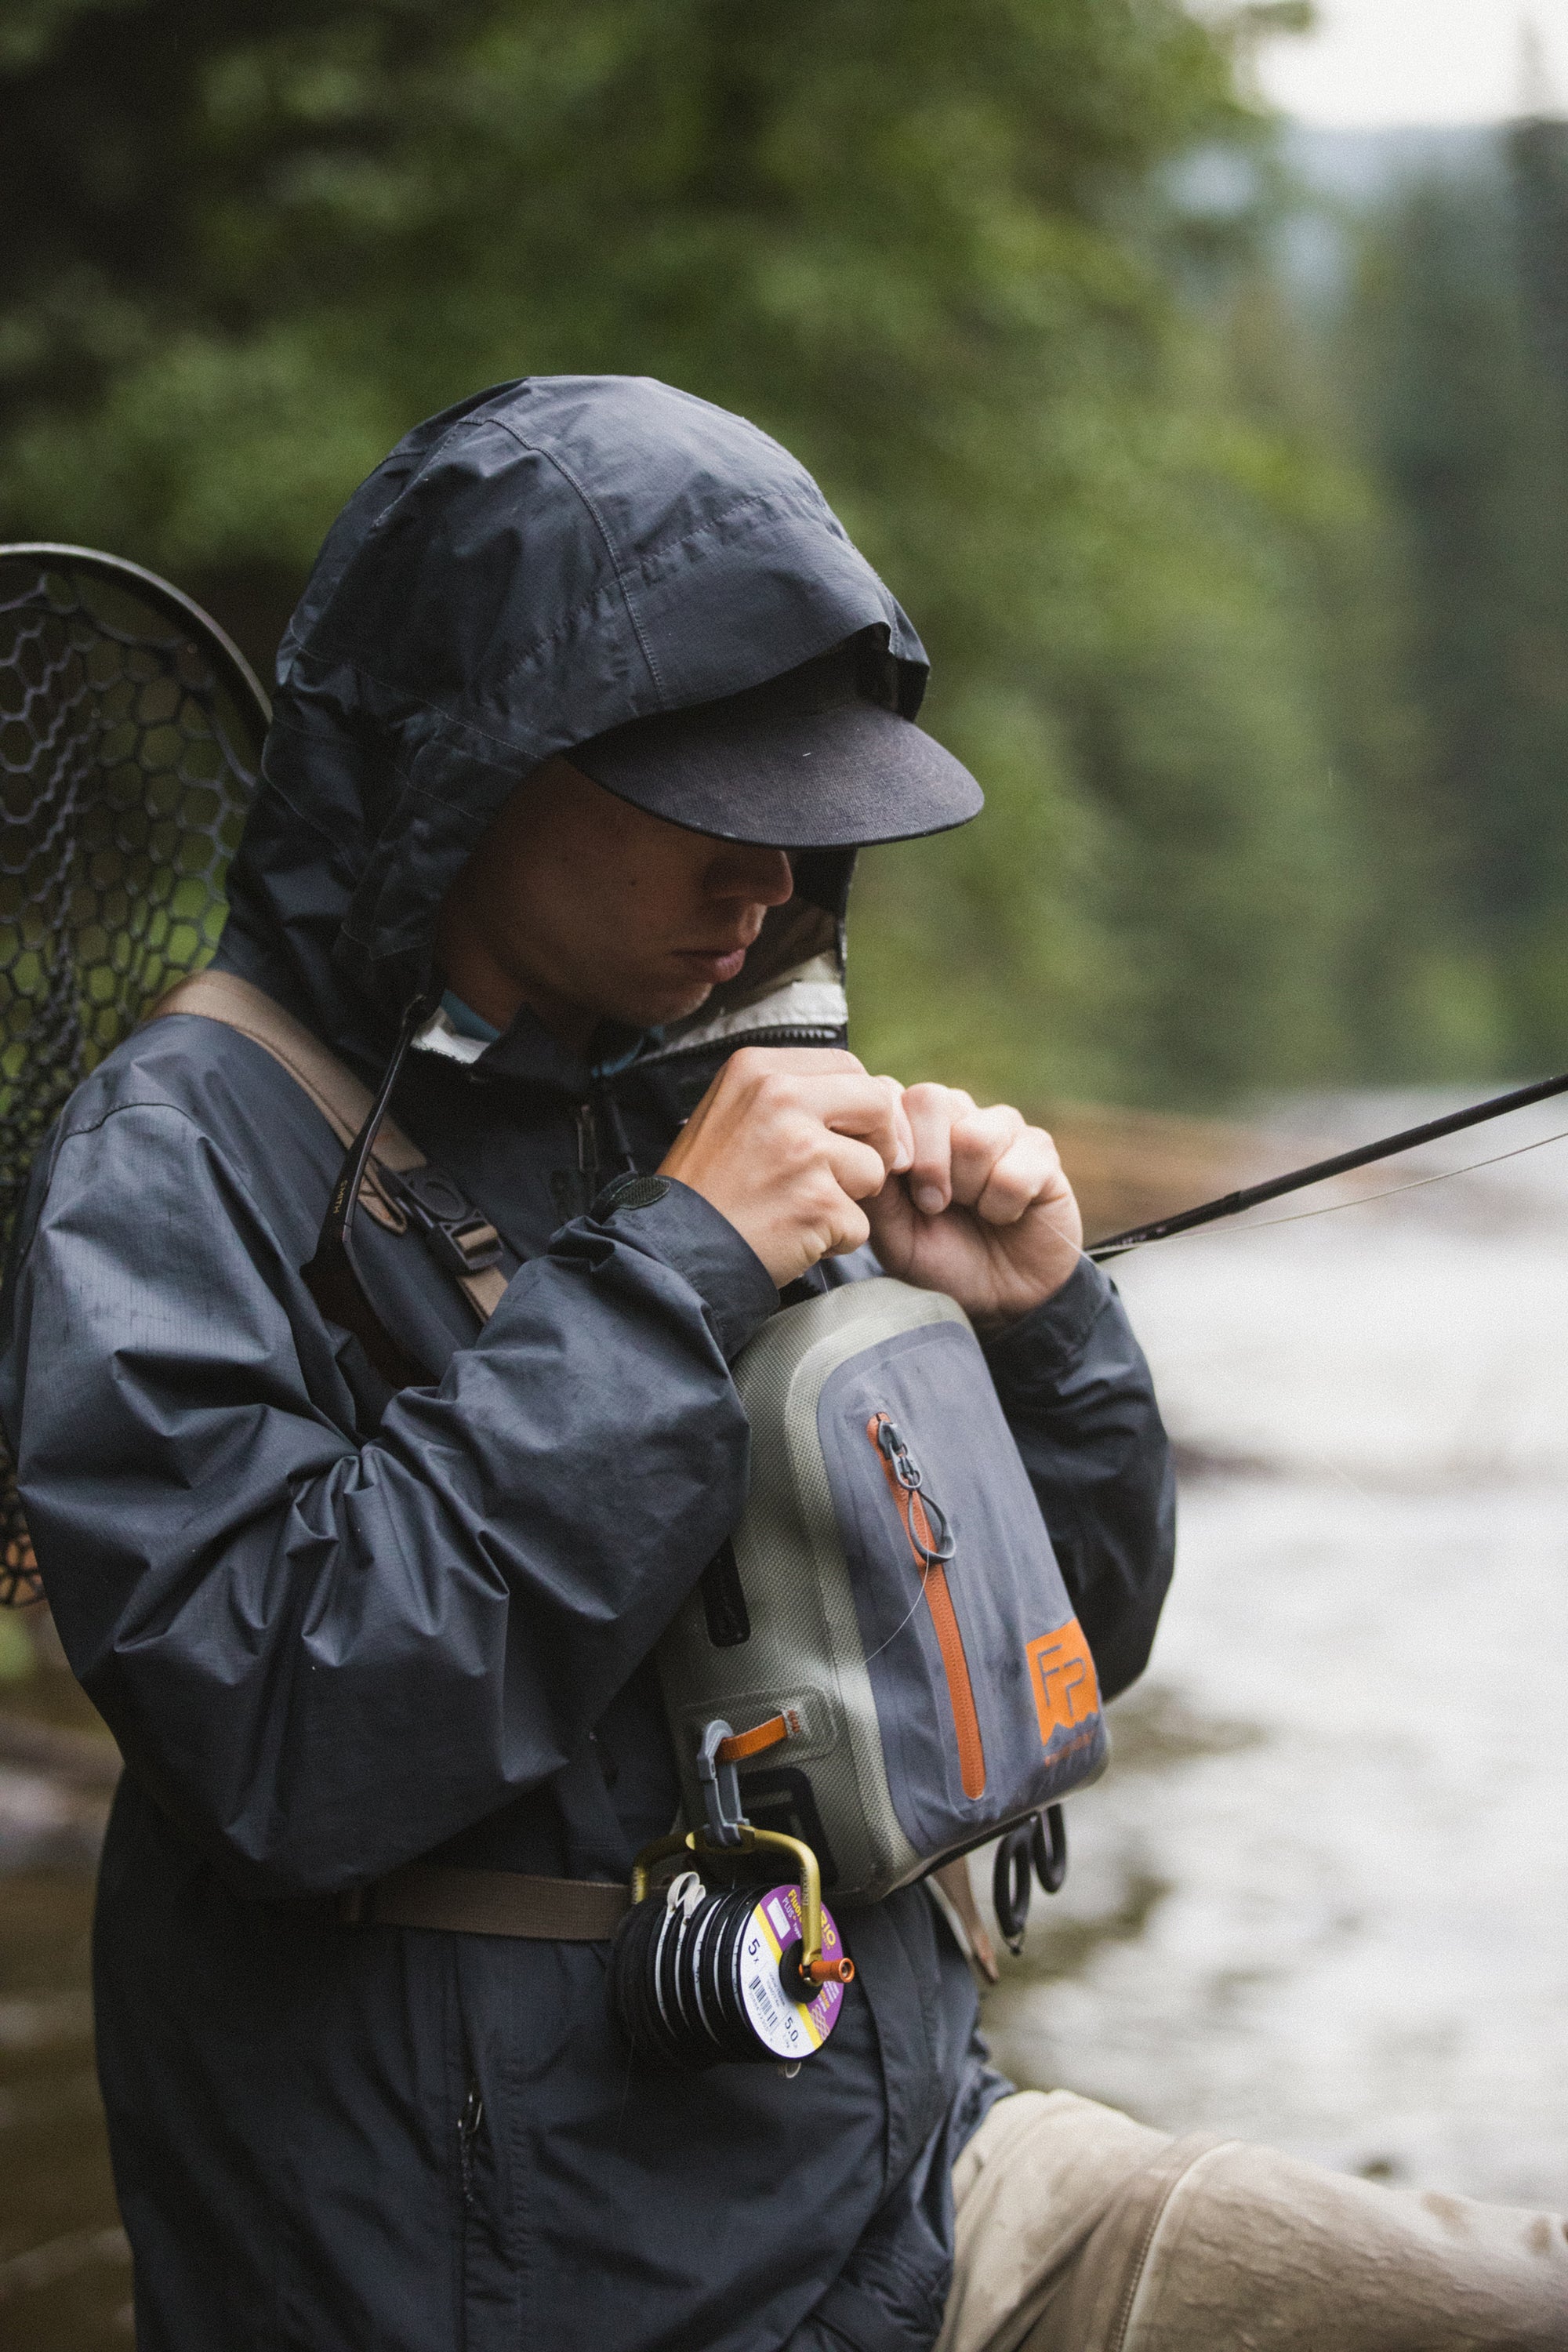 chest fly fishing bag - Buy chest fly fishing bag at Best Price in Malaysia